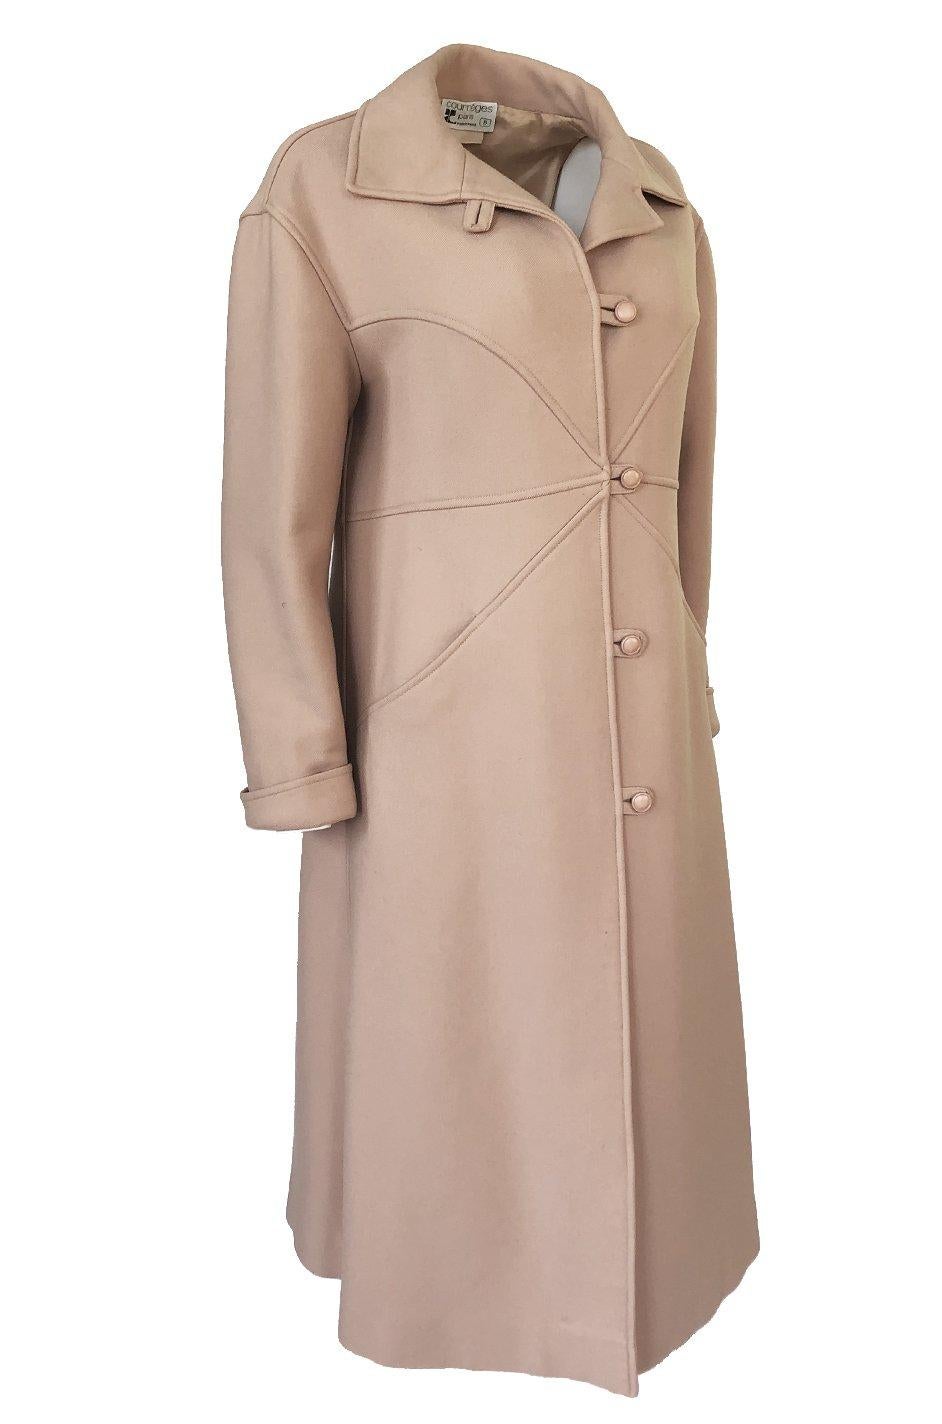 Brown Immaculate 1960s Courreges Unusually Seamed Camel Toggle Coat